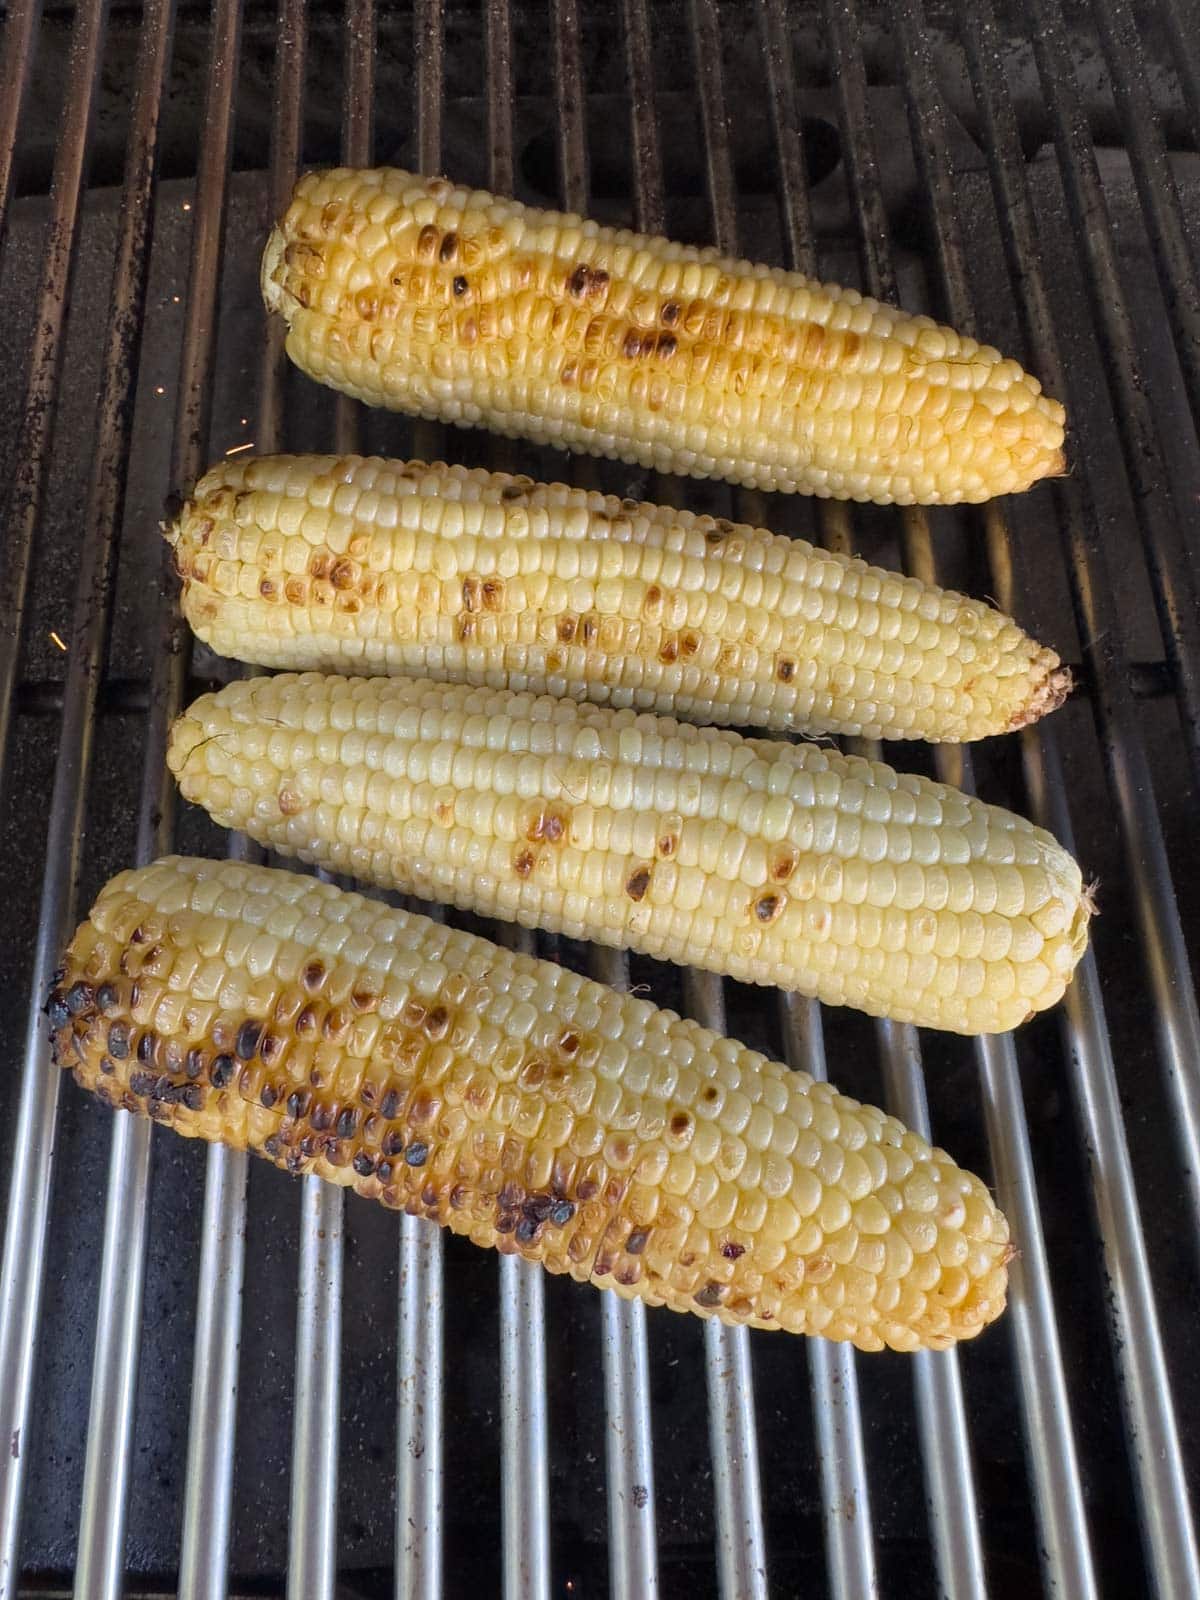 Four golden ears of corn on the cob on the grill. 